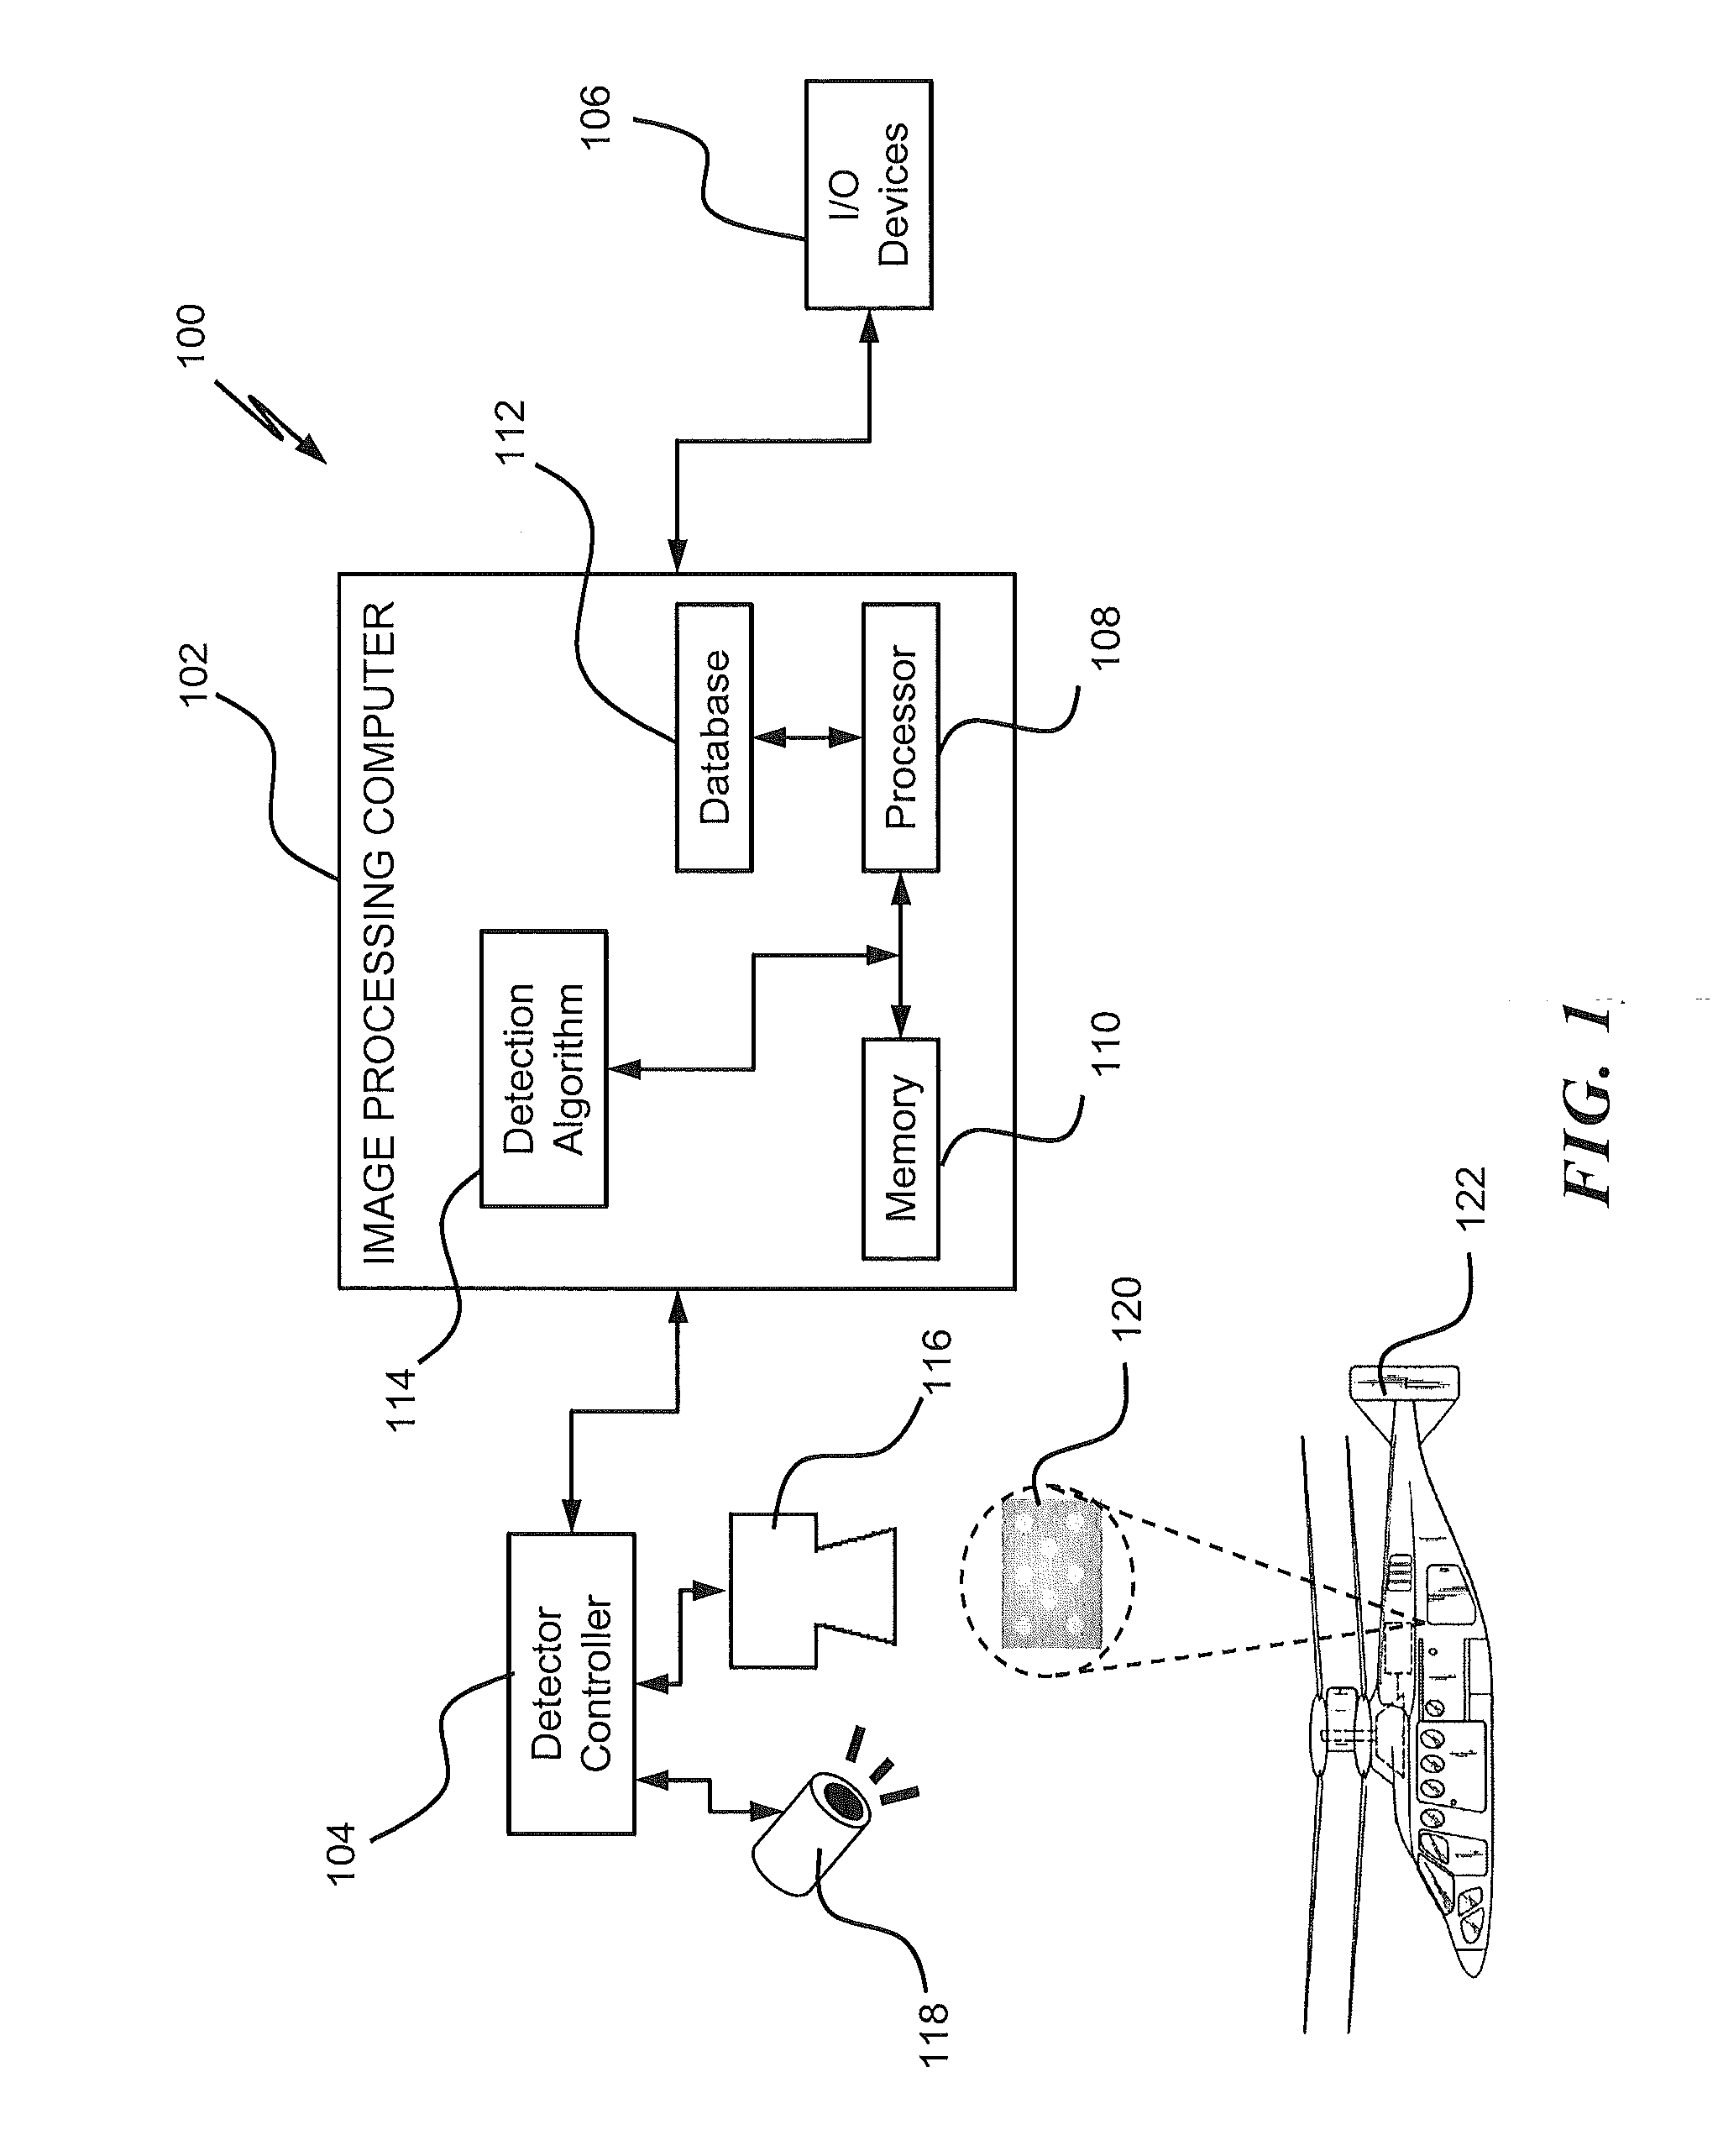 Structural hot spot and critical location monitoring system and method